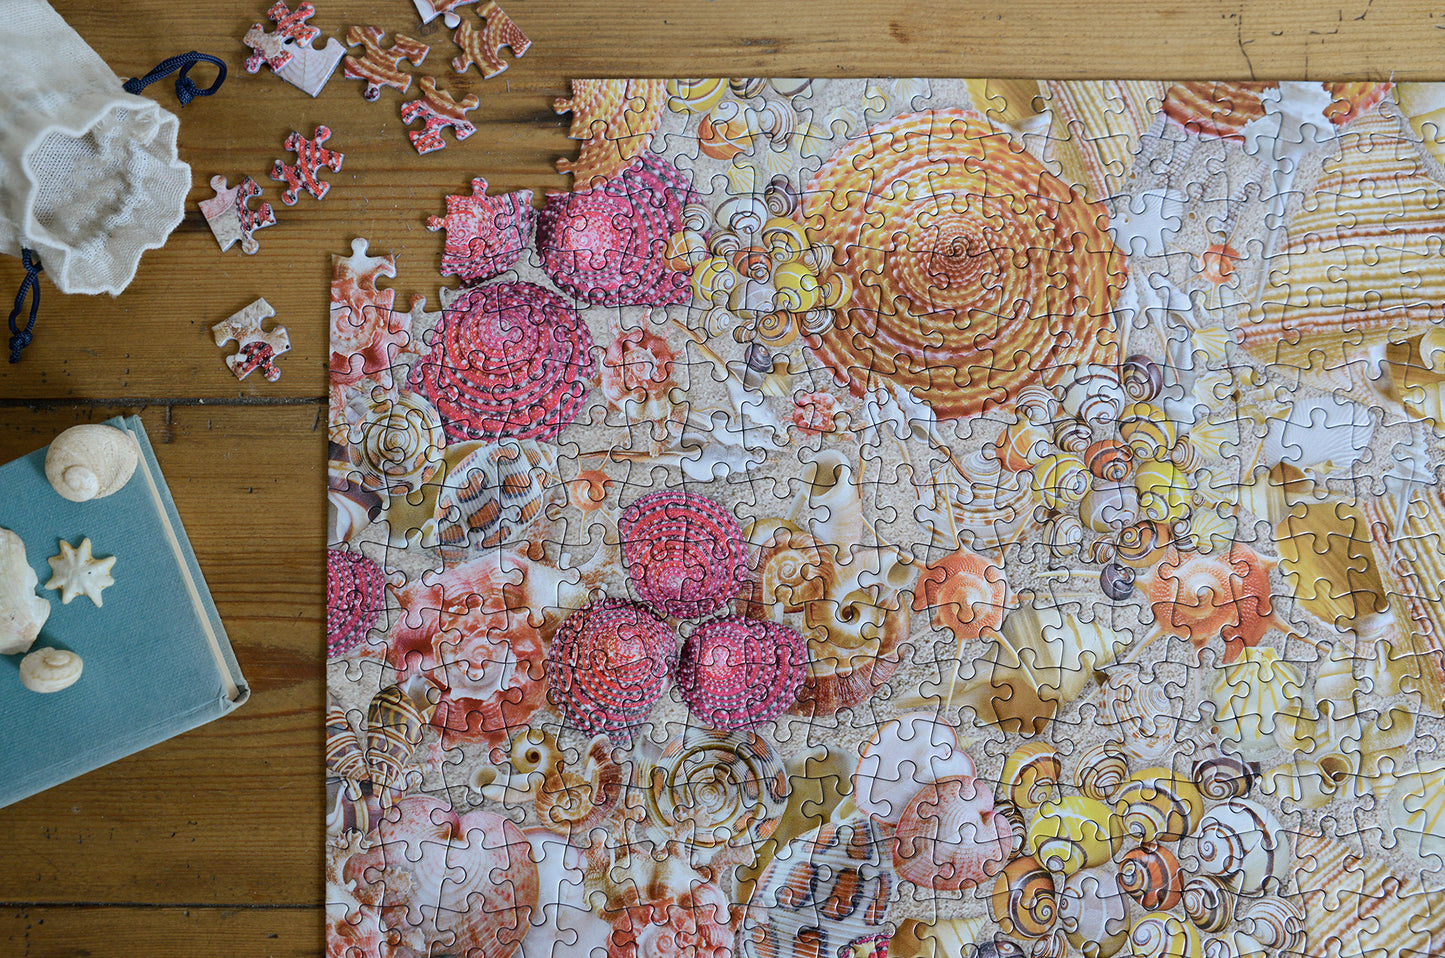 Natural History Museum - Shells 1000 Piece Jigsaw Puzzle